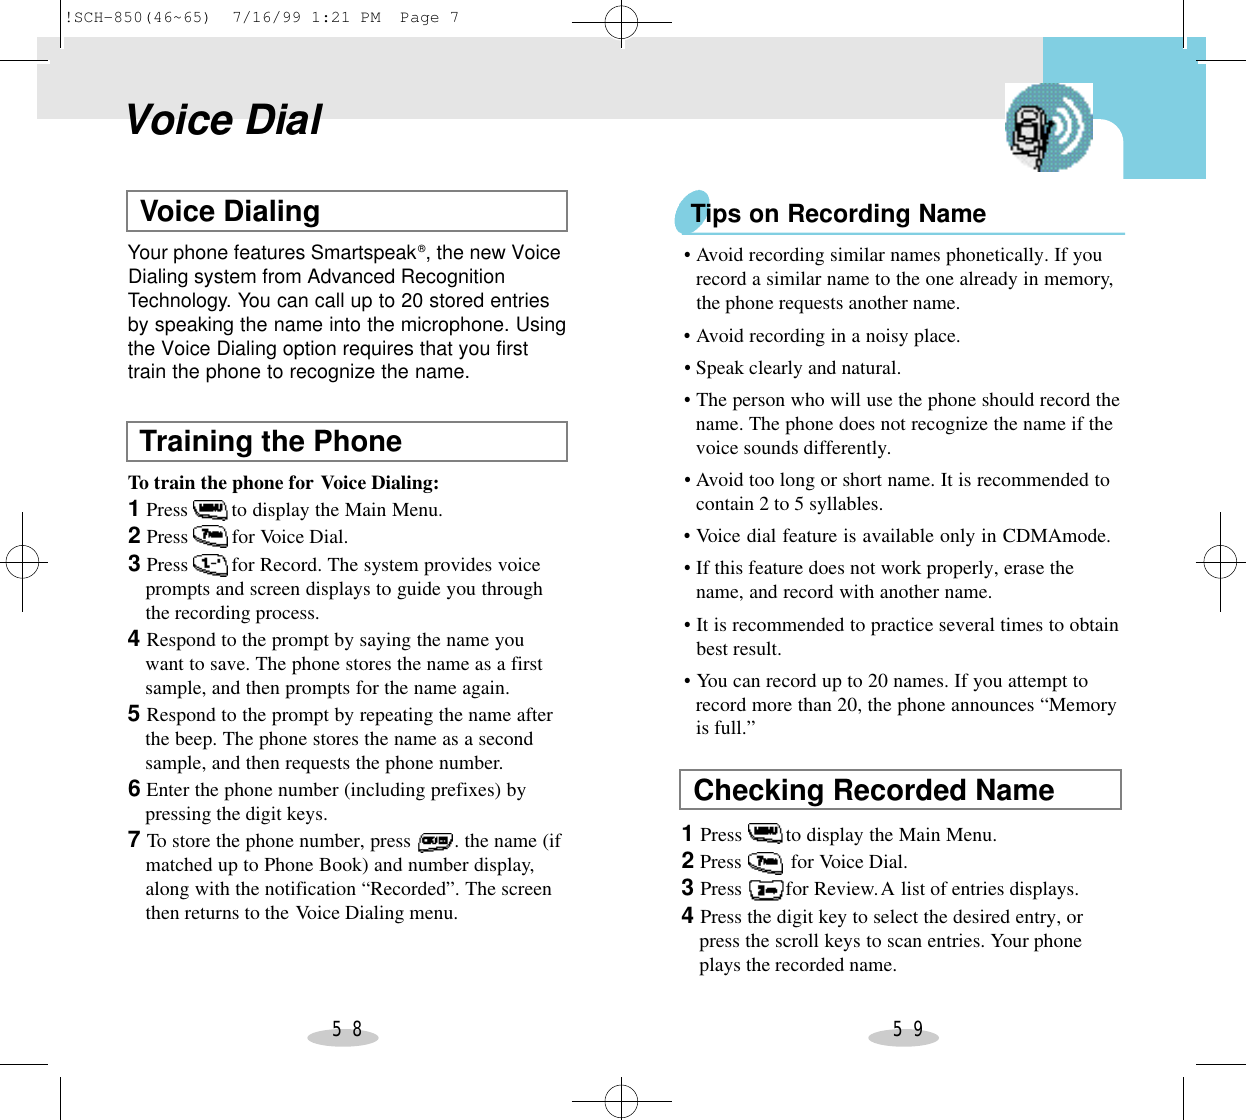 5 8 5 9Voice DialVoice DialingYour phone features Smartspeak®, the new VoiceDialing system from Advanced RecognitionTechnology. You can call up to 20 stored entriesby speaking the name into the microphone. Usingthe Voice Dialing option requires that you firsttrain the phone to recognize the name.Training the PhoneTo train the phone for Voice Dialing:1Press        to display the Main Menu.2Press        for Voice Dial.3Press        for Record. The system provides voice prompts and screen displays to guide you throughthe recording process.4Respond to the prompt by saying the name you want to save. The phone stores the name as a firstsample, and then prompts for the name again.5Respond to the prompt by repeating the name after the beep. The phone stores the name as a secondsample, and then requests the phone number.6Enter the phone number (including prefixes) by pressing the digit keys.7To store the phone number, press        . the name (if matched up to Phone Book) and number display,along with the notification “Recorded”. The screenthen returns to the Voice Dialing menu.Tips on Recording NameChecking Recorded Name1Press        to display the Main Menu.2Press         for Voice Dial.3Press        for Review.A list of entries displays.4Press the digit key to select the desired entry, or press the scroll keys to scan entries. Your phoneplays the recorded name.•Avoid recording similar names phonetically. If you record a similar name to the one already in memory,the phone requests another name.•Avoid recording in a noisy place.•Speak clearly and natural.•The person who will use the phone should record the name. The phone does not recognize the name if thevoice sounds differently.•Avoid too long or short name. It is recommended to contain 2 to 5 syllables.•Voice dial feature is available only in CDMAmode.•If this feature does not work properly, erase the name, and record with another name.•It is recommended to practice several times to obtain best result.•You can record up to 20 names. If you attempt to record more than 20, the phone announces “Memoryis full.”!SCH-850(46~65)  7/16/99 1:21 PM  Page 7